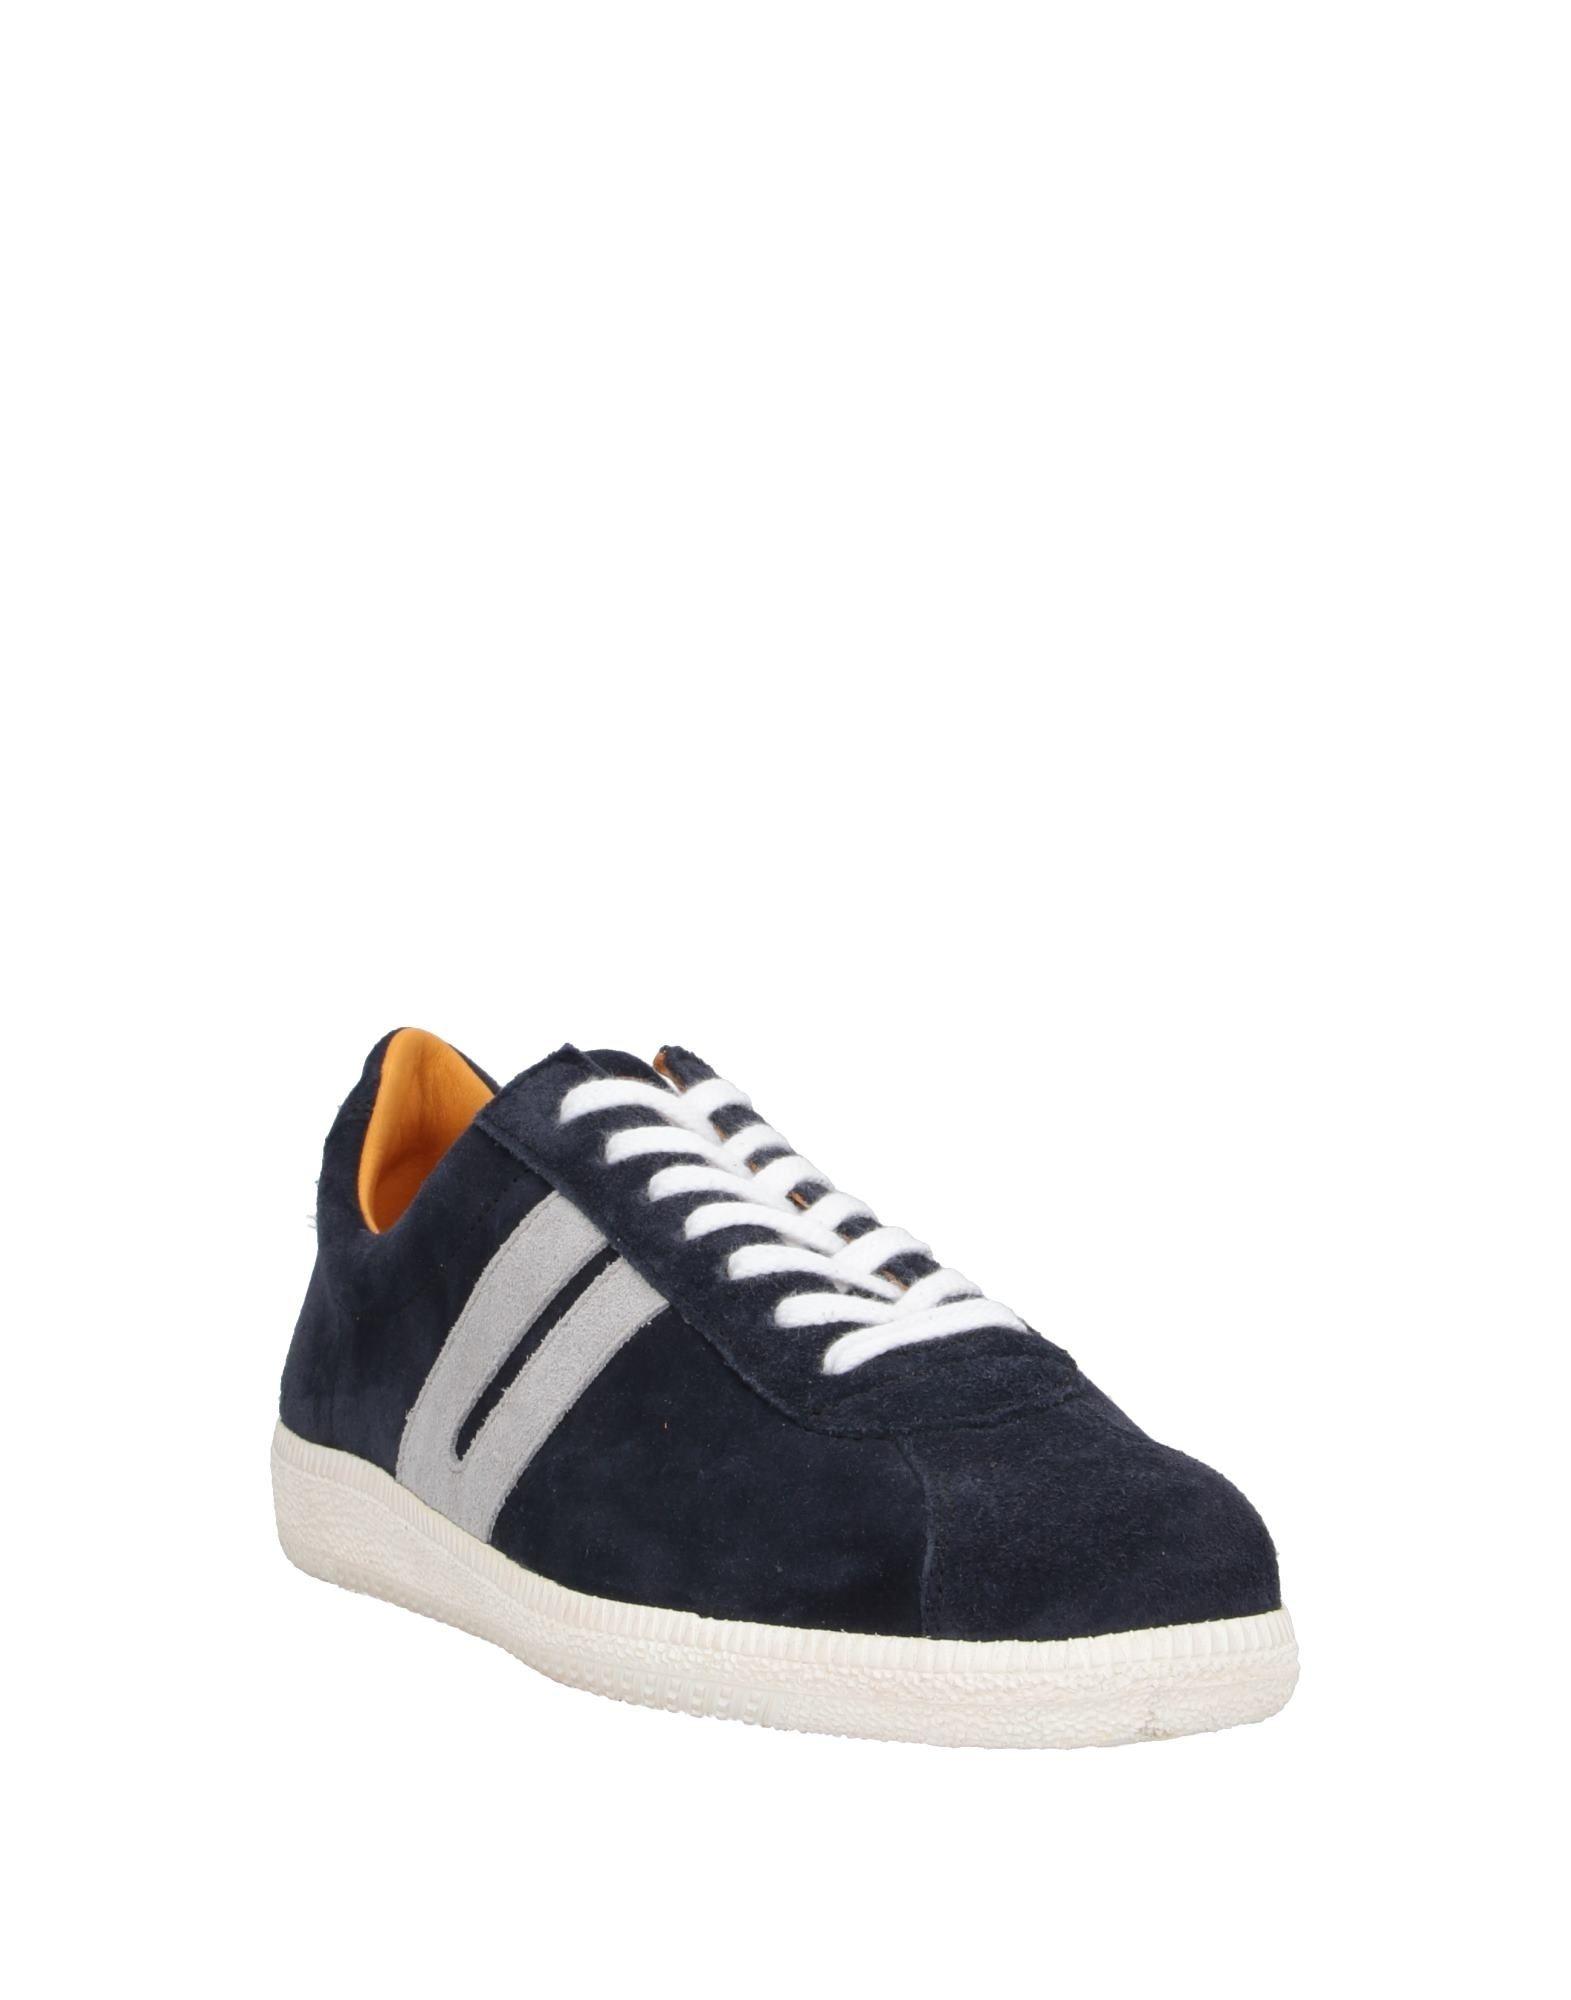 Ludwig Reiter Low-tops & Sneakers in Blue for Men - Lyst